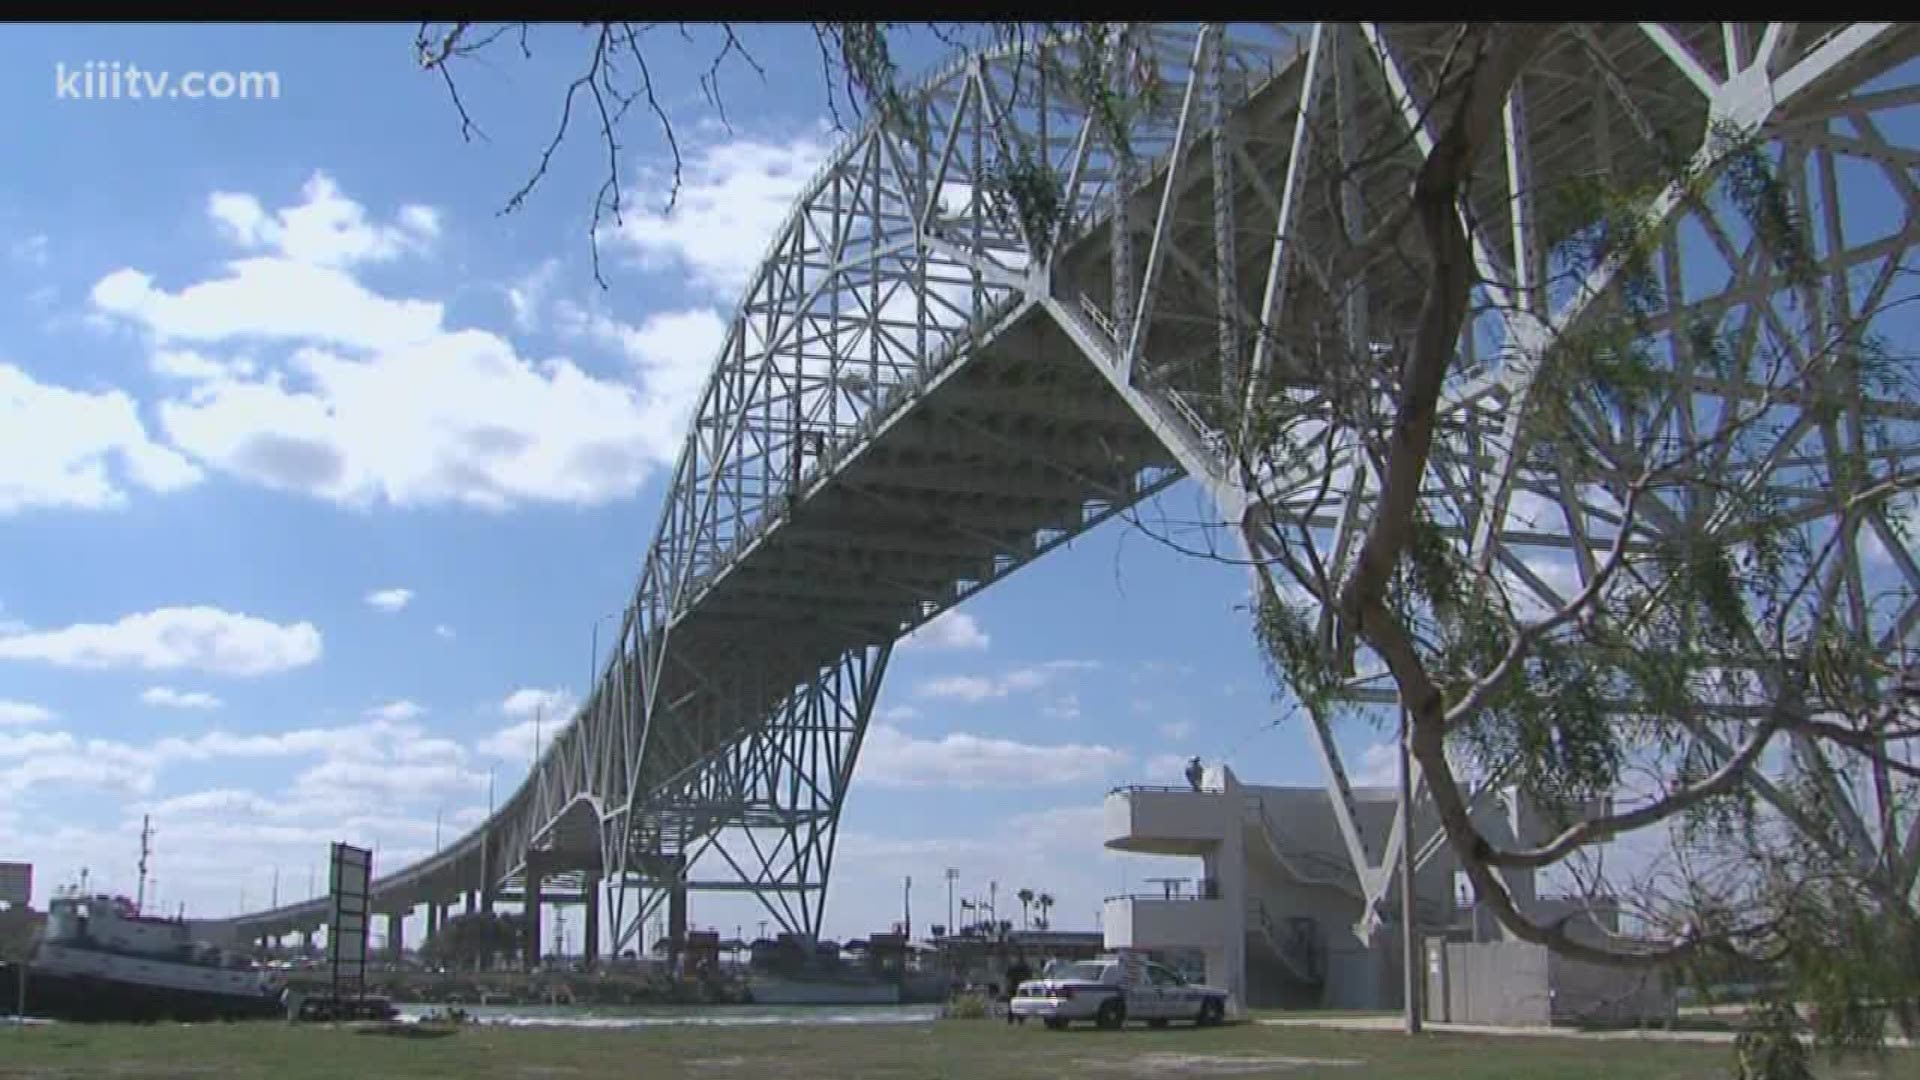 There are a few lane closures that are part of the new Harbor Bridge Project that drivers might want to be aware of this weekend.